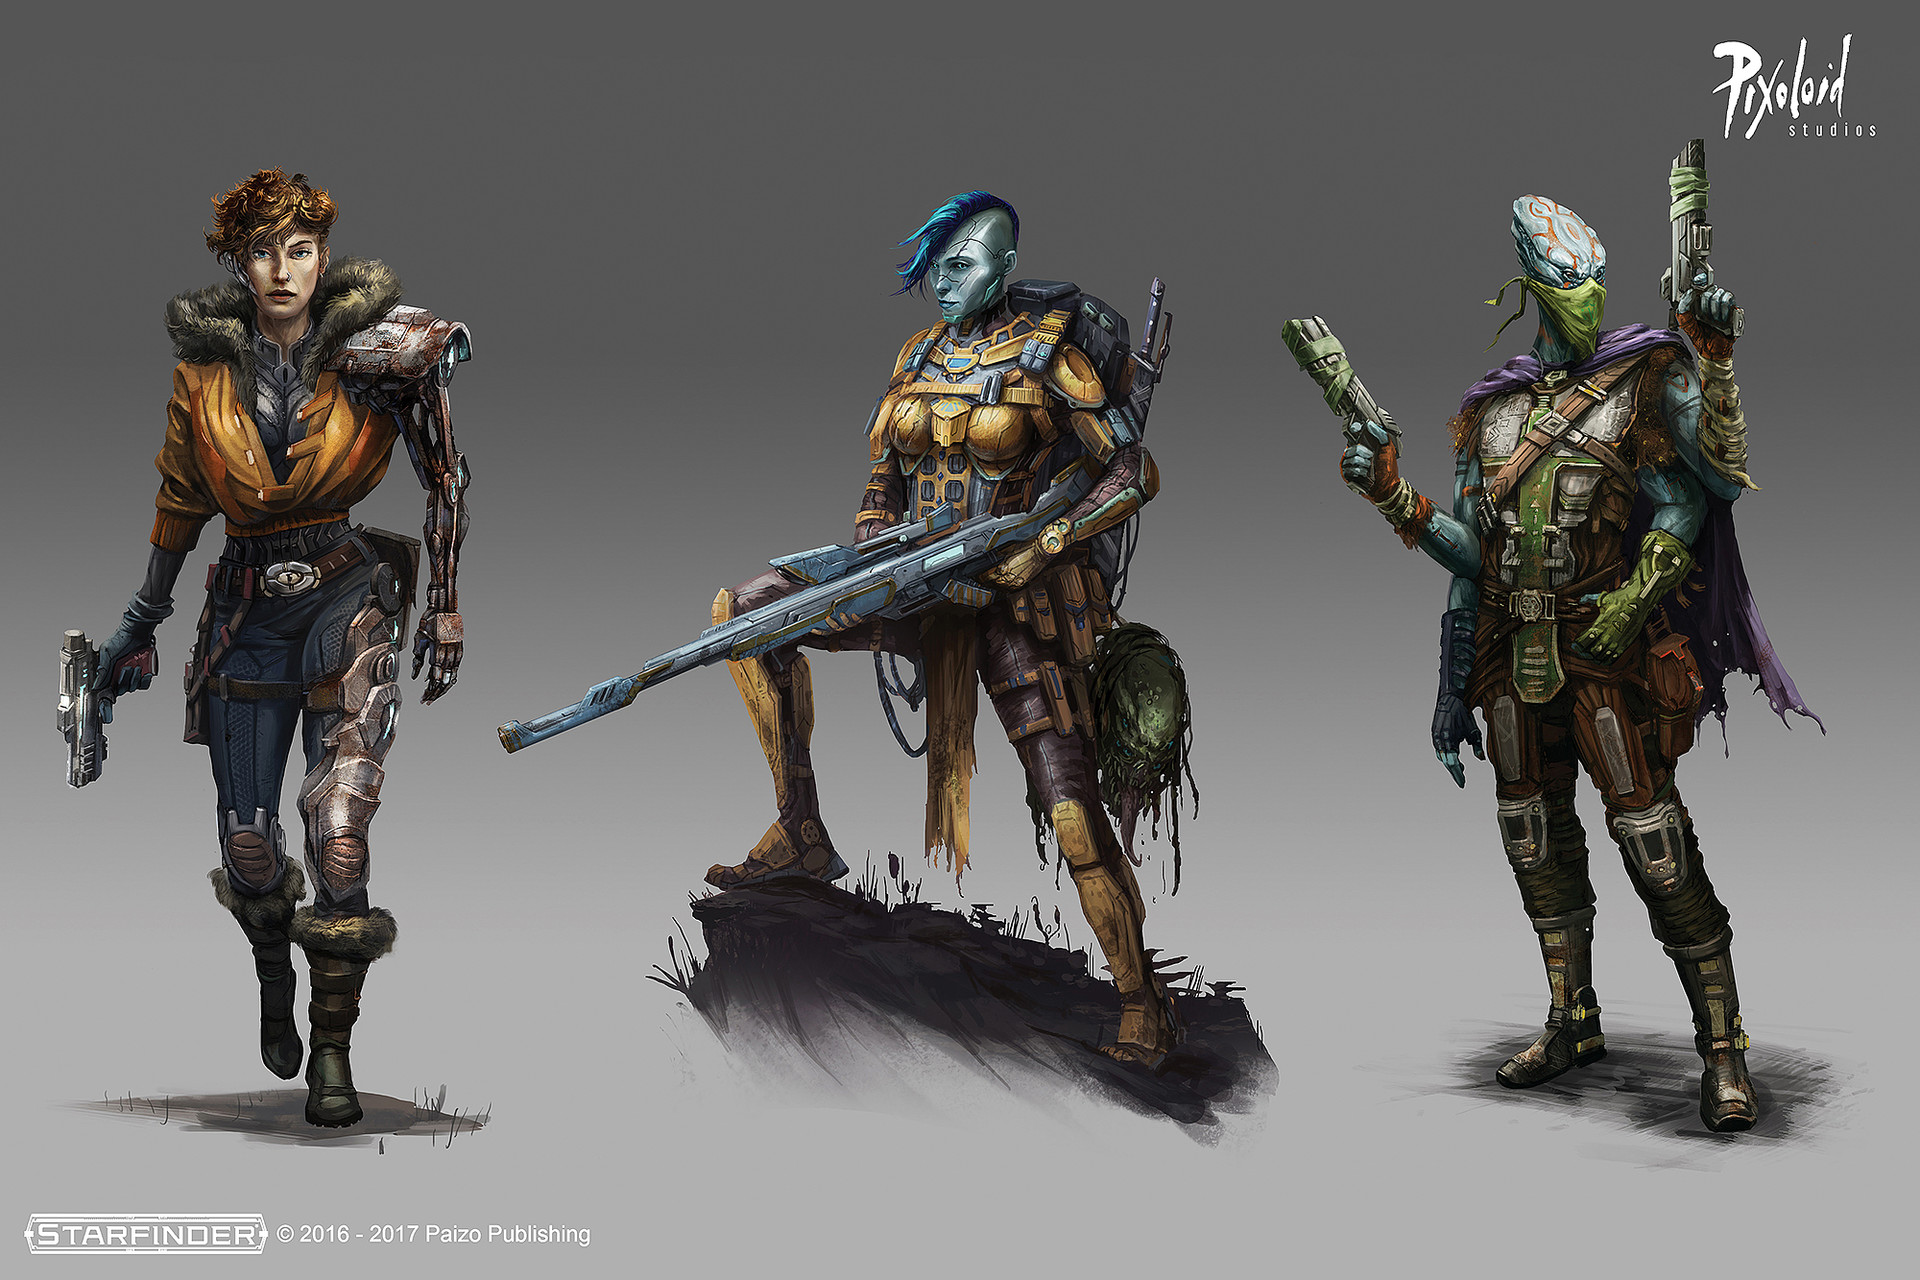 Character illustrations for a scifi rpg by Paizo publishing